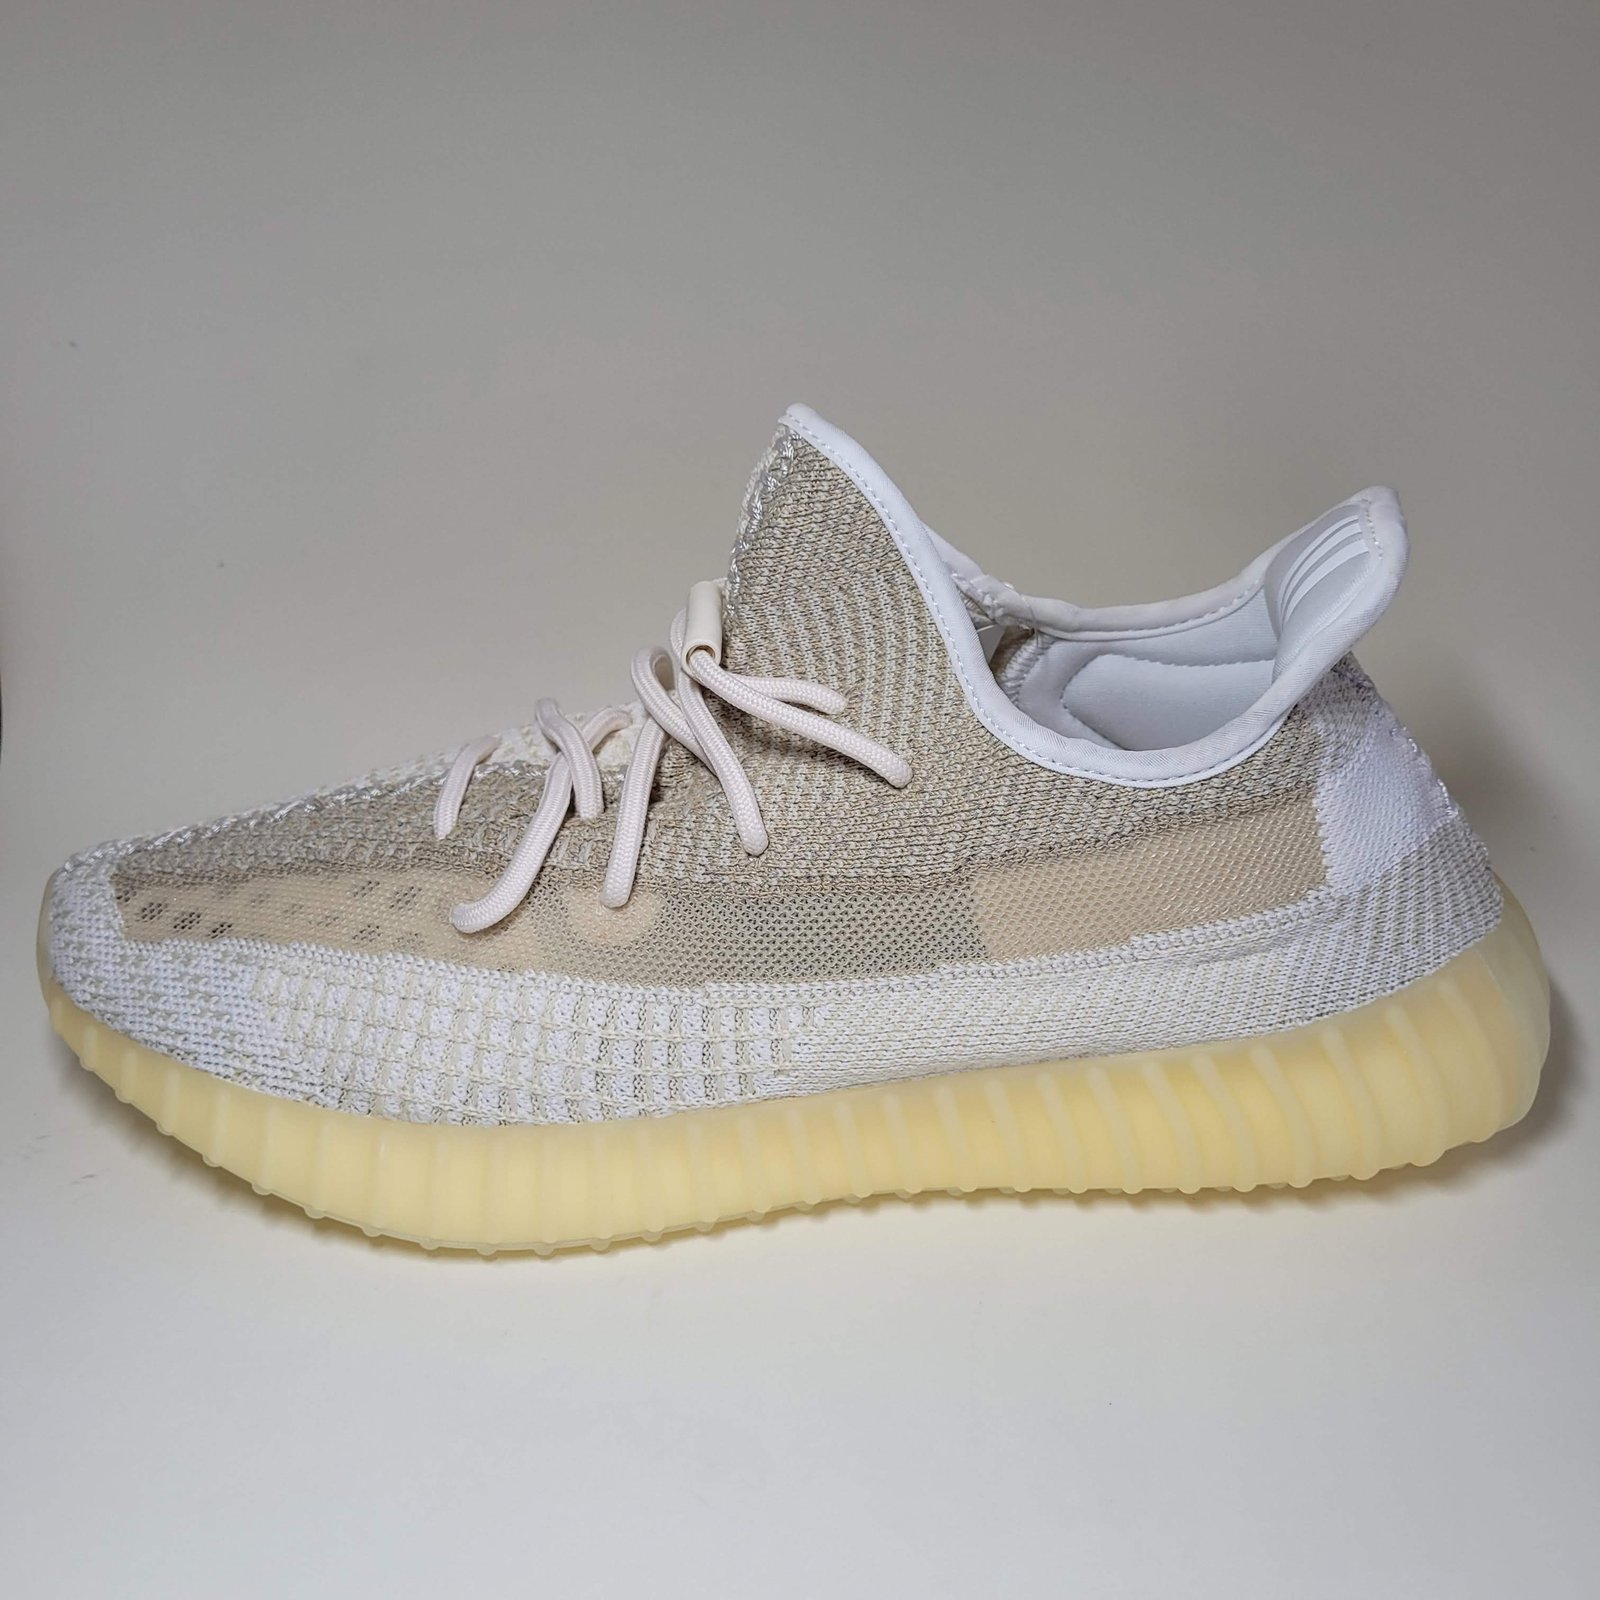 adidas yeezy boost 350 v2 natural